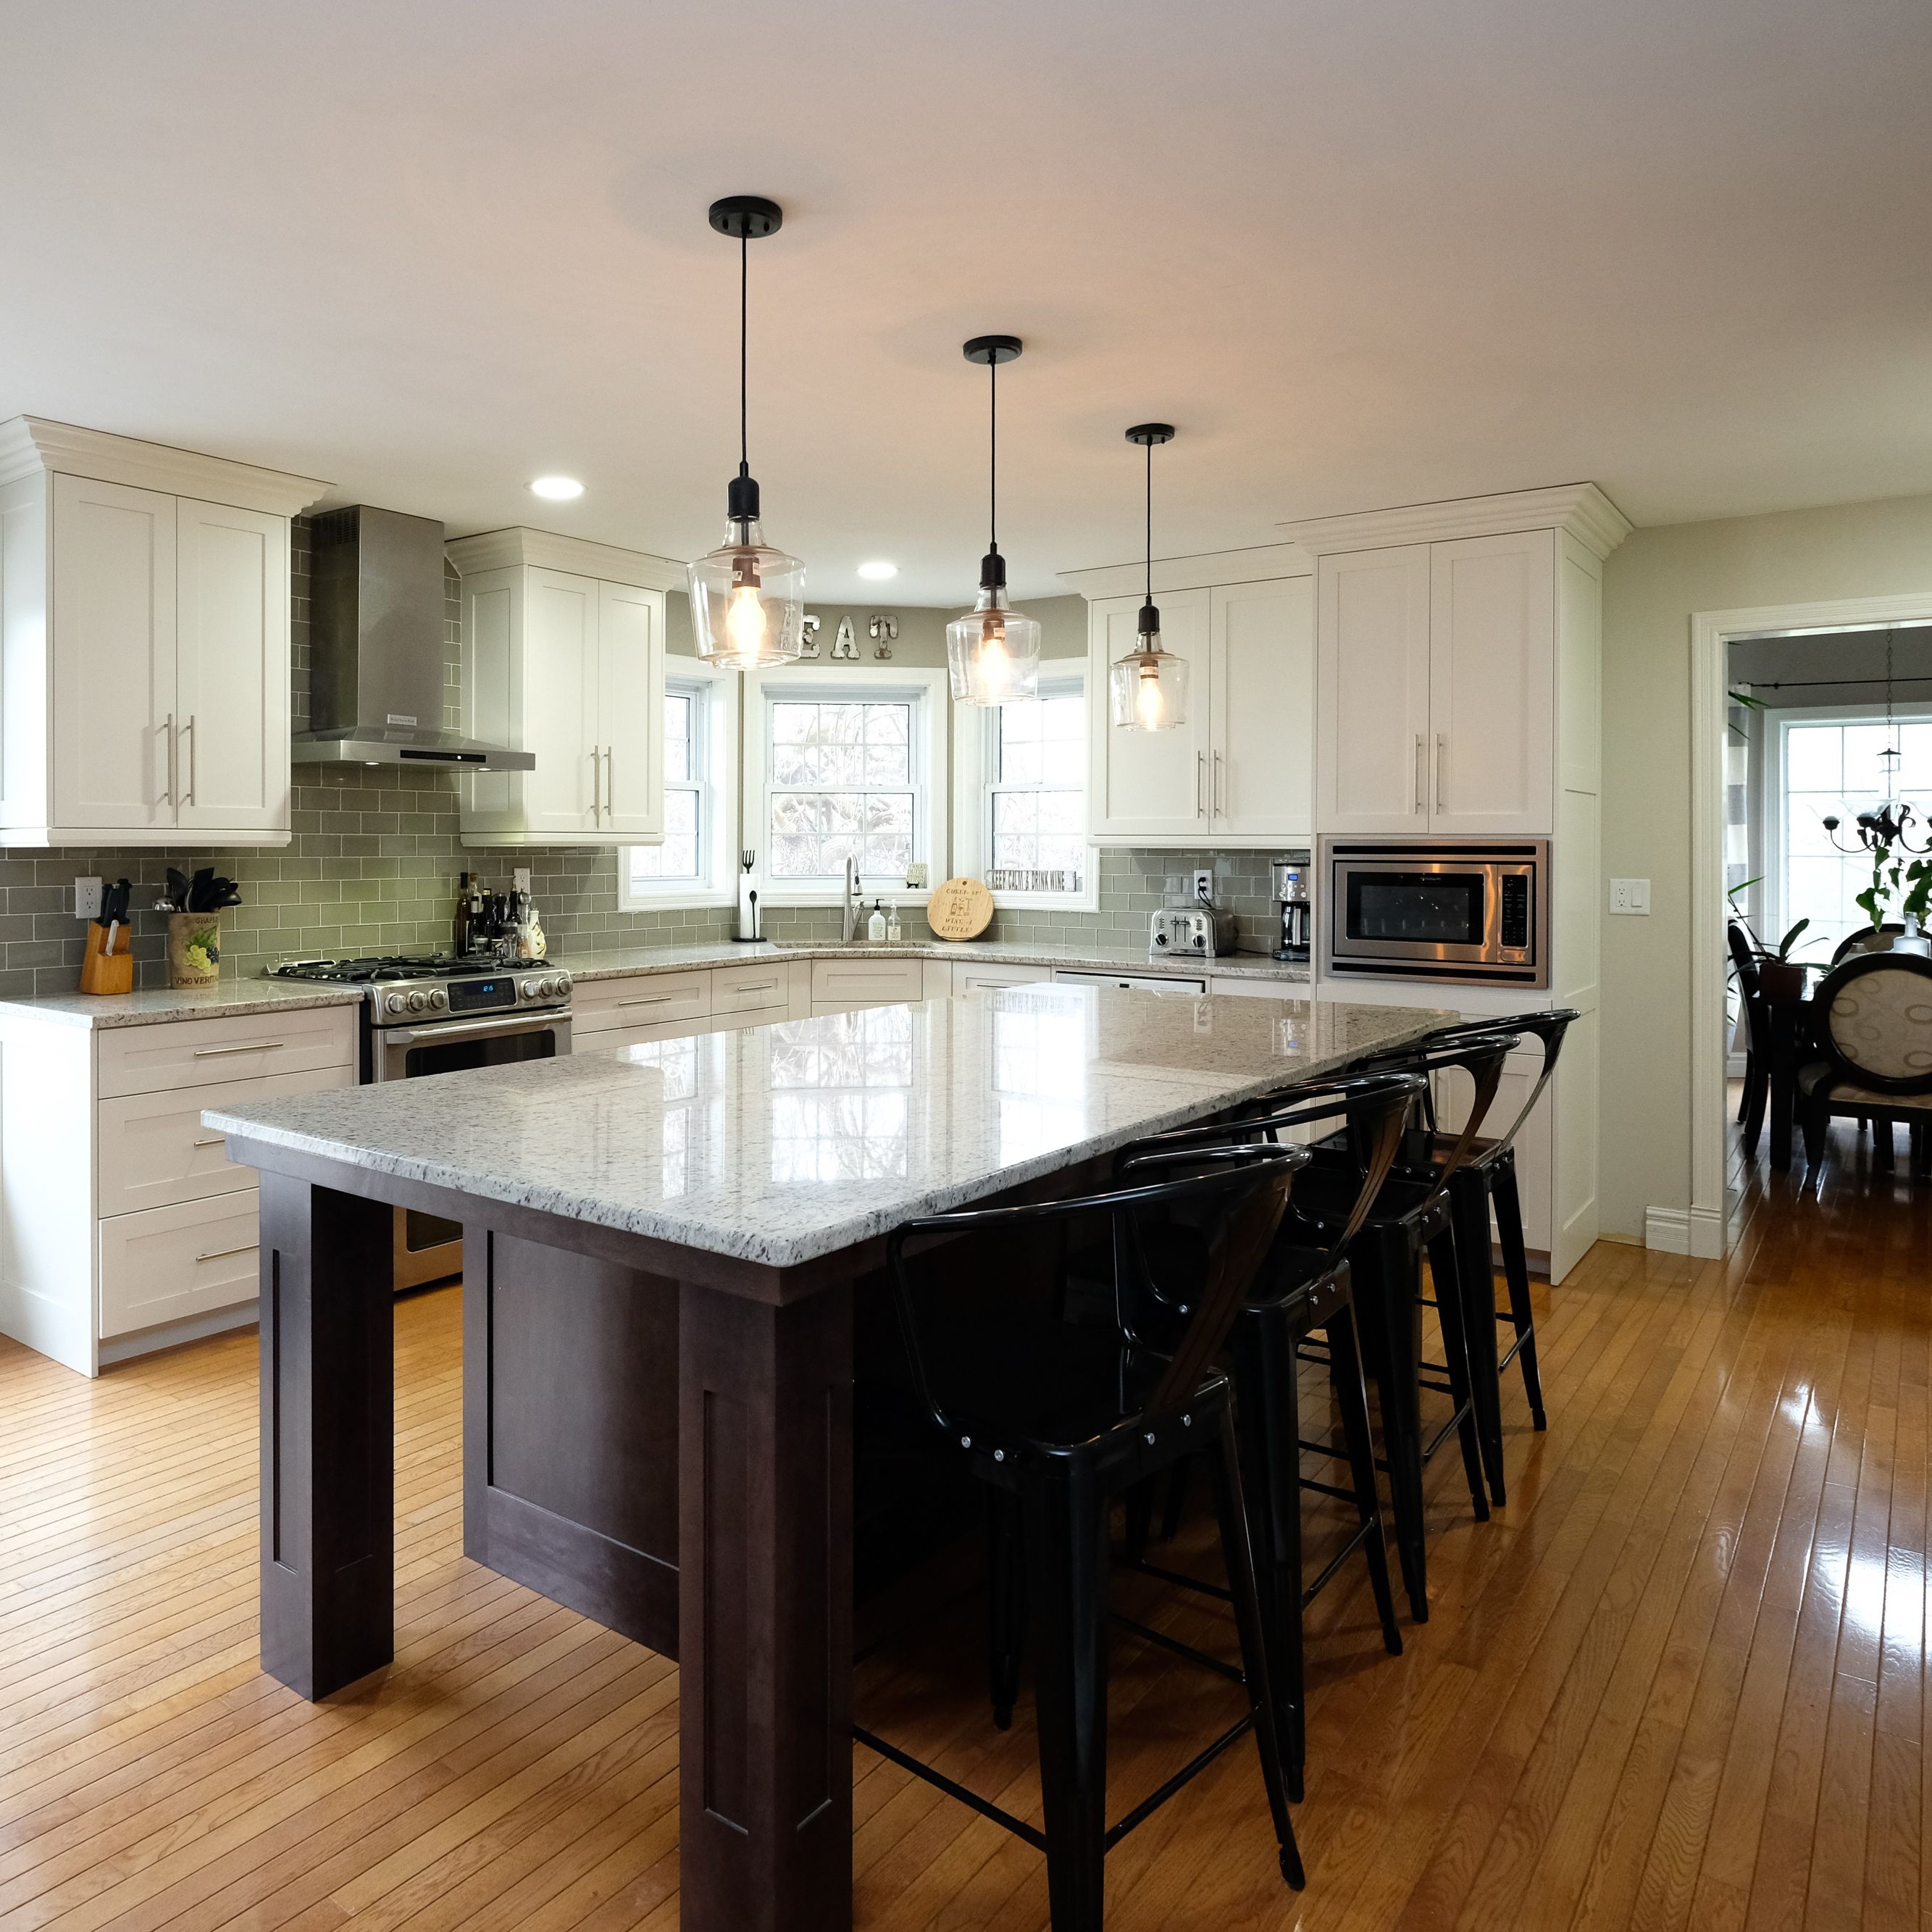 New Kitchen Cabinets in Maidstone, Ontario